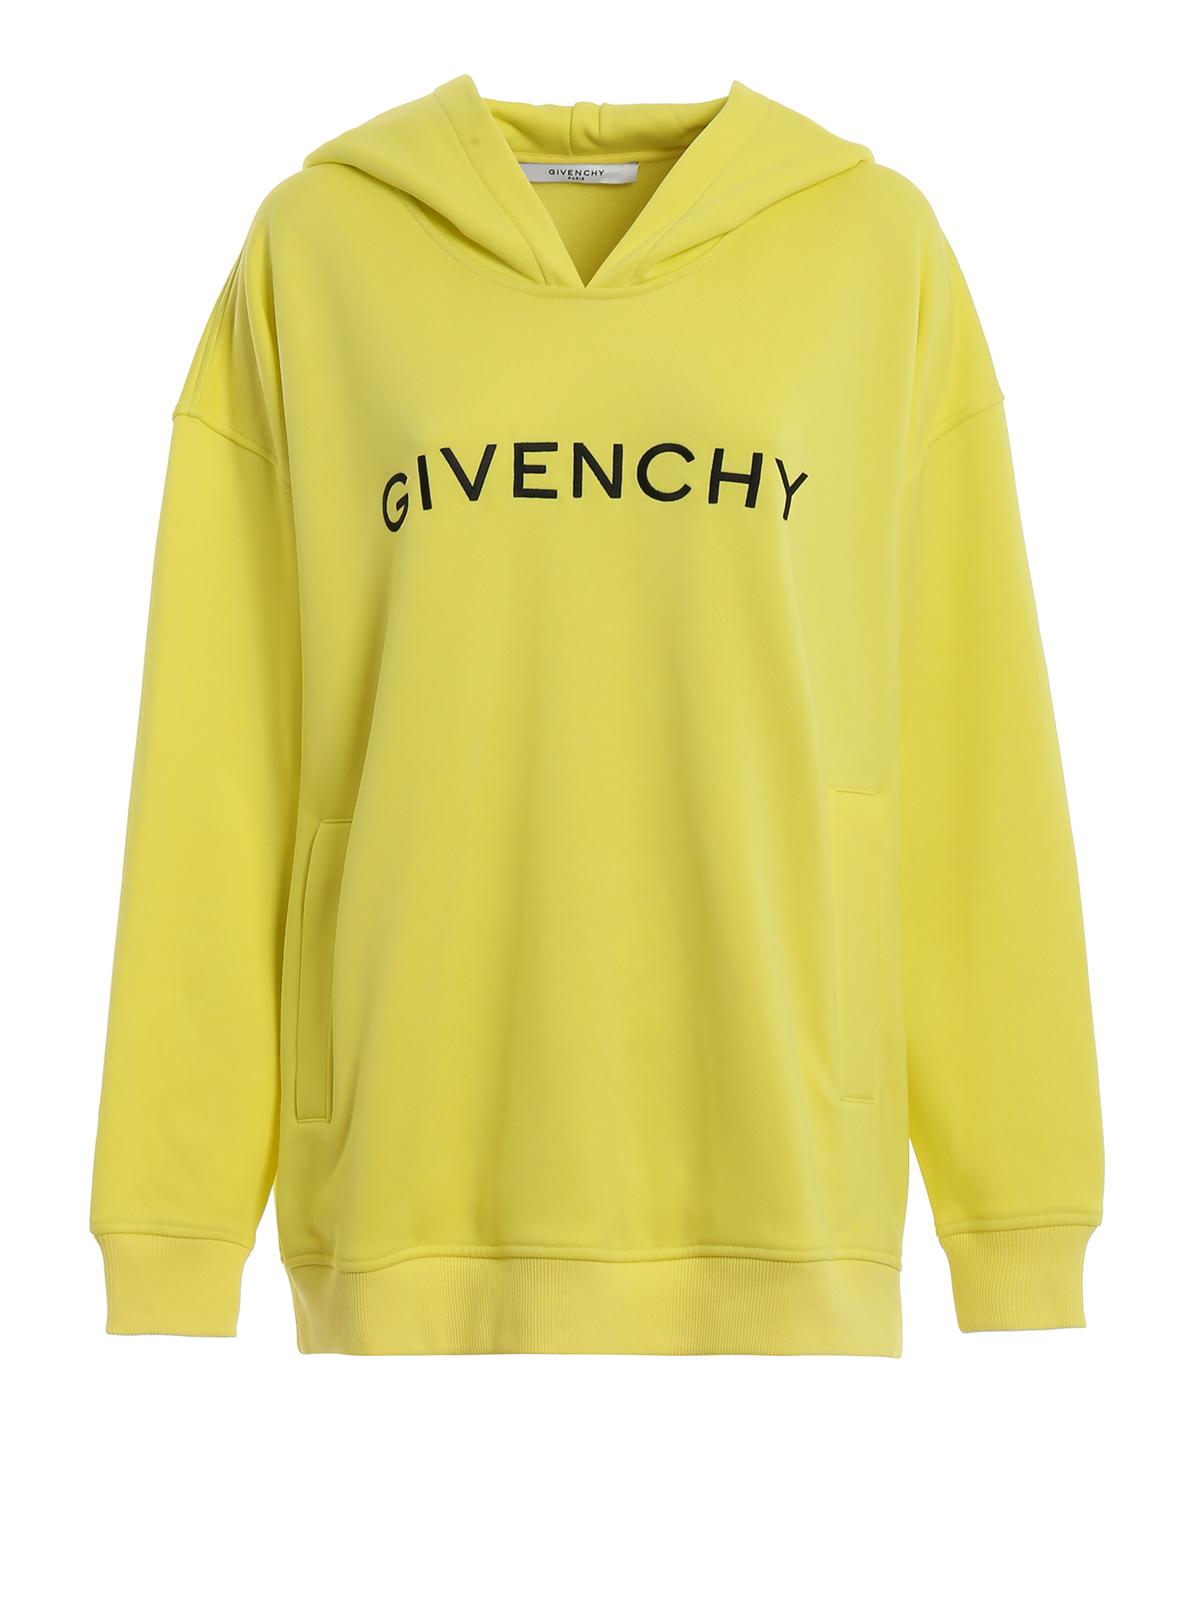 Givenchy Synthetic Logo Embroidery Over Hoodie in Yellow - Save 6% - Lyst